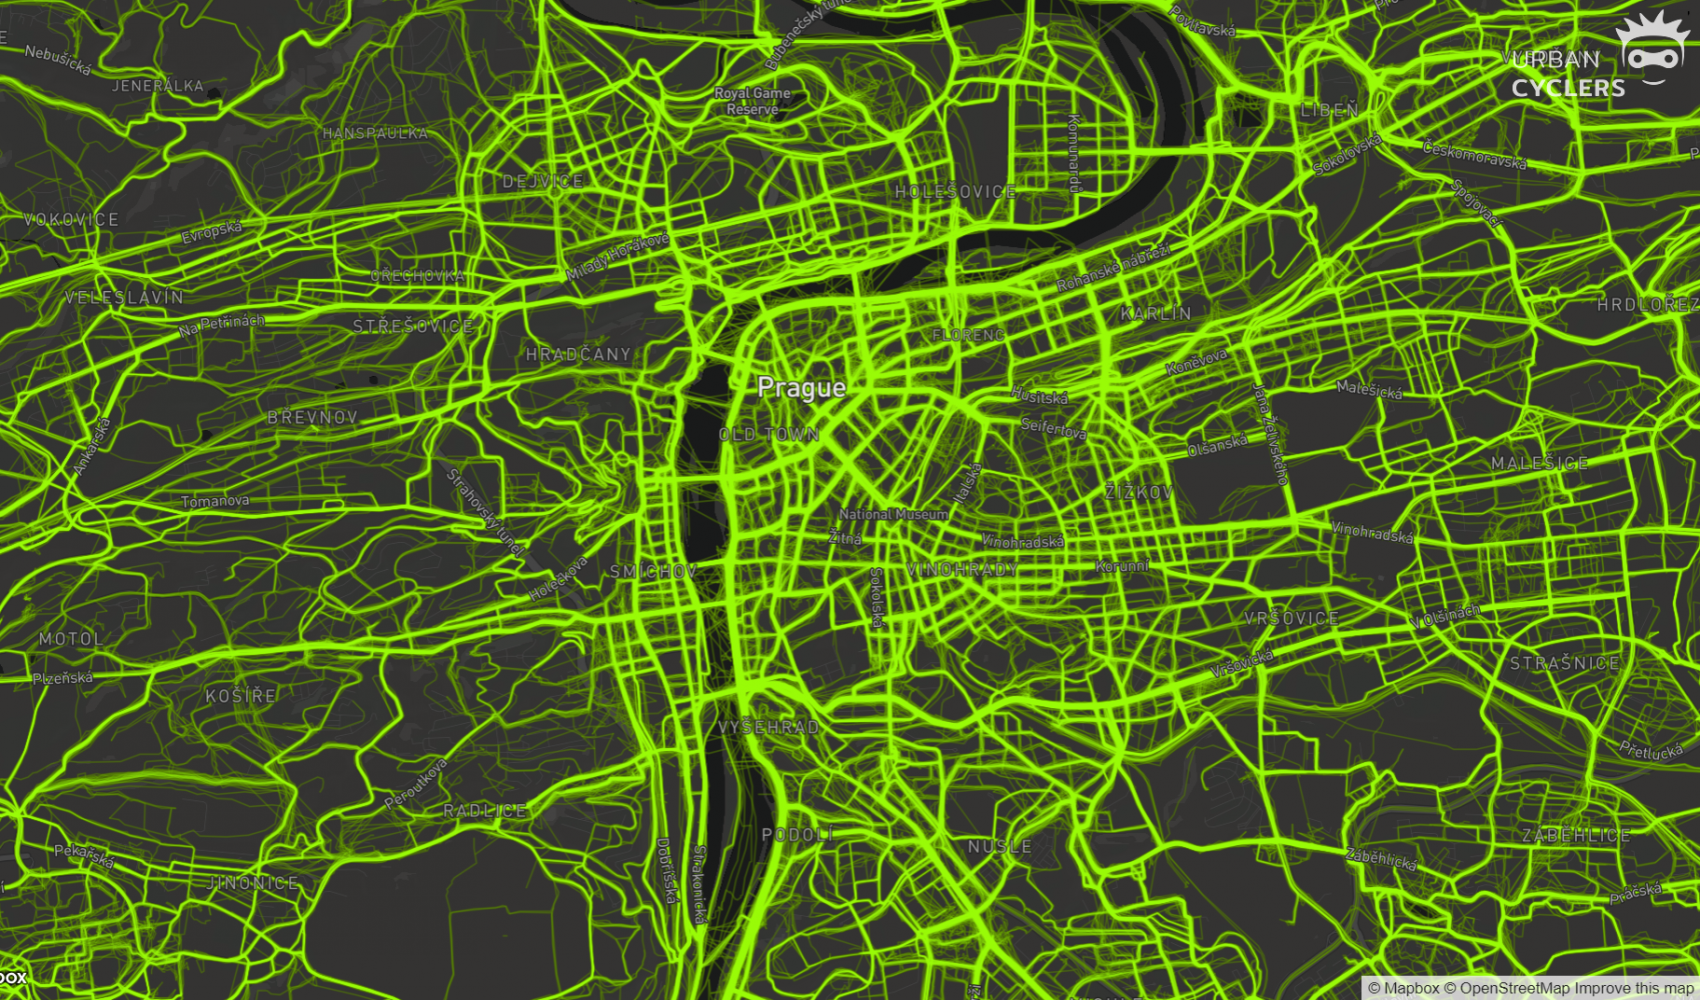 Heatmaps are one of the inputs to data-driven cycling behaviour models